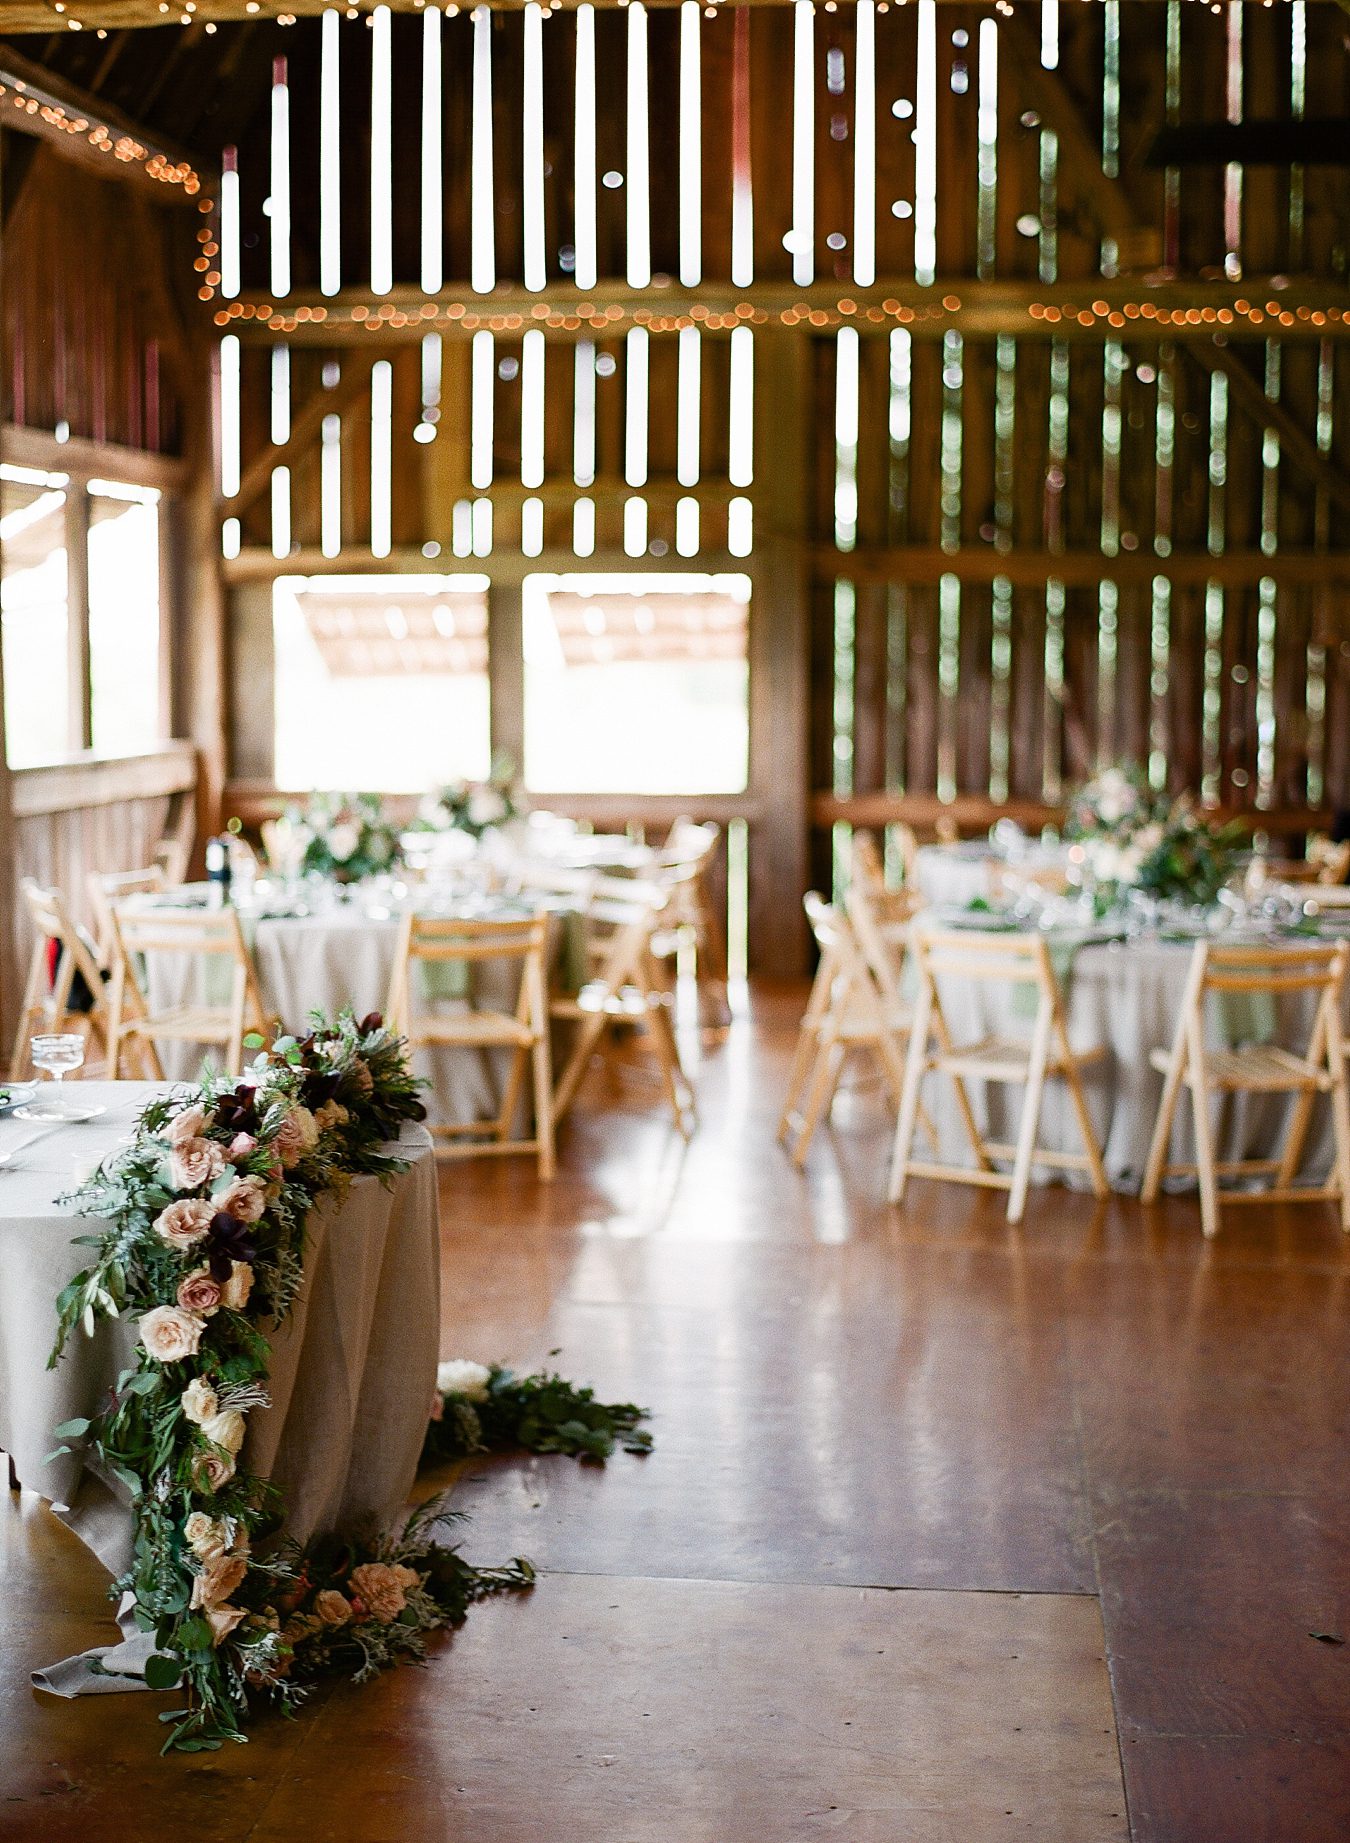 Ciccone Vineyards Barn Wedding | Traverse City Mi Wedding Photography | Cory Weber Photography | Sincerely, Ginger Event Design & Production